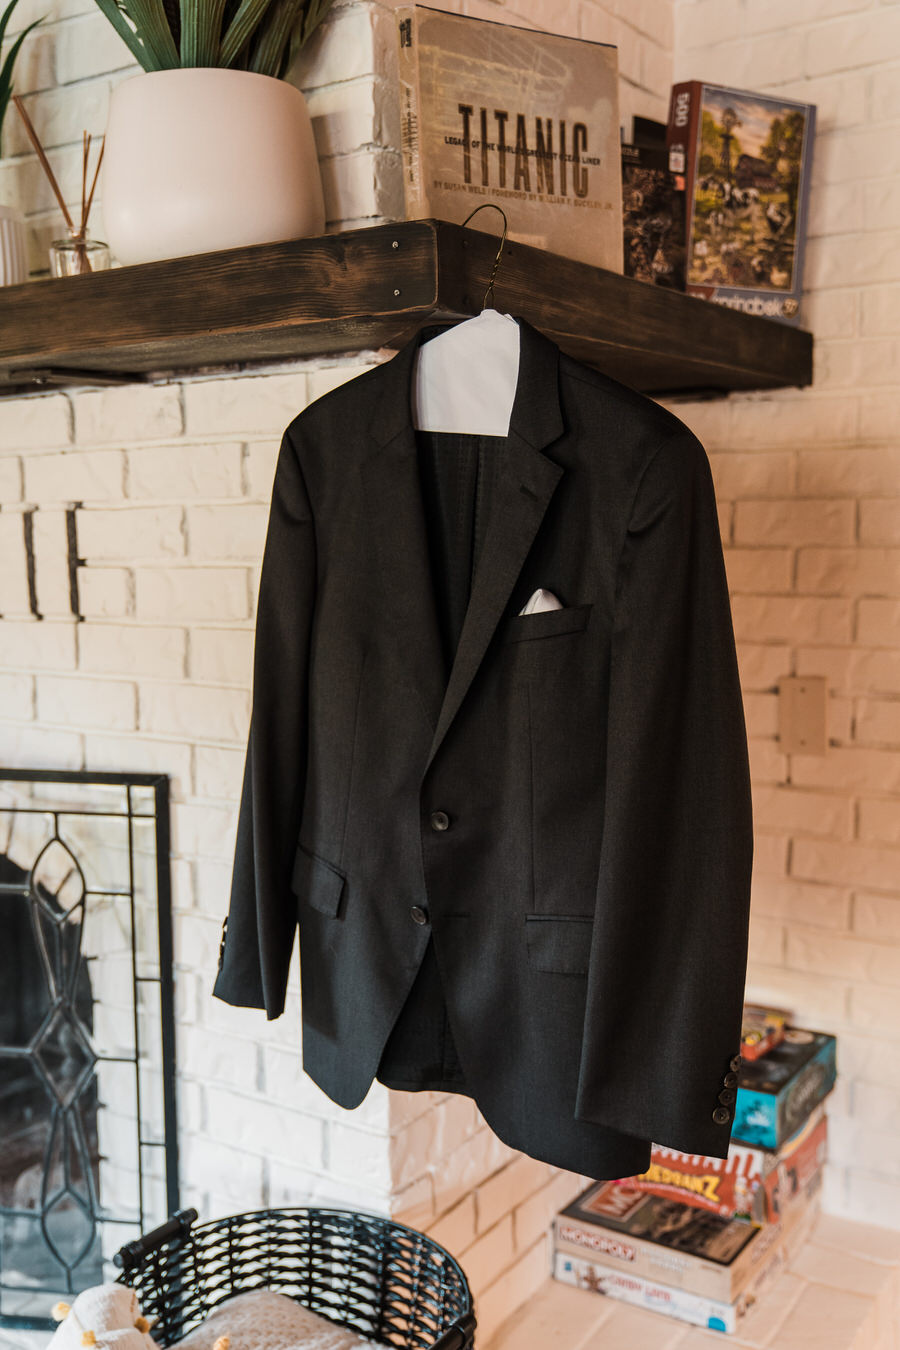 A groom's suit jacket hanging on a fireplace mantle